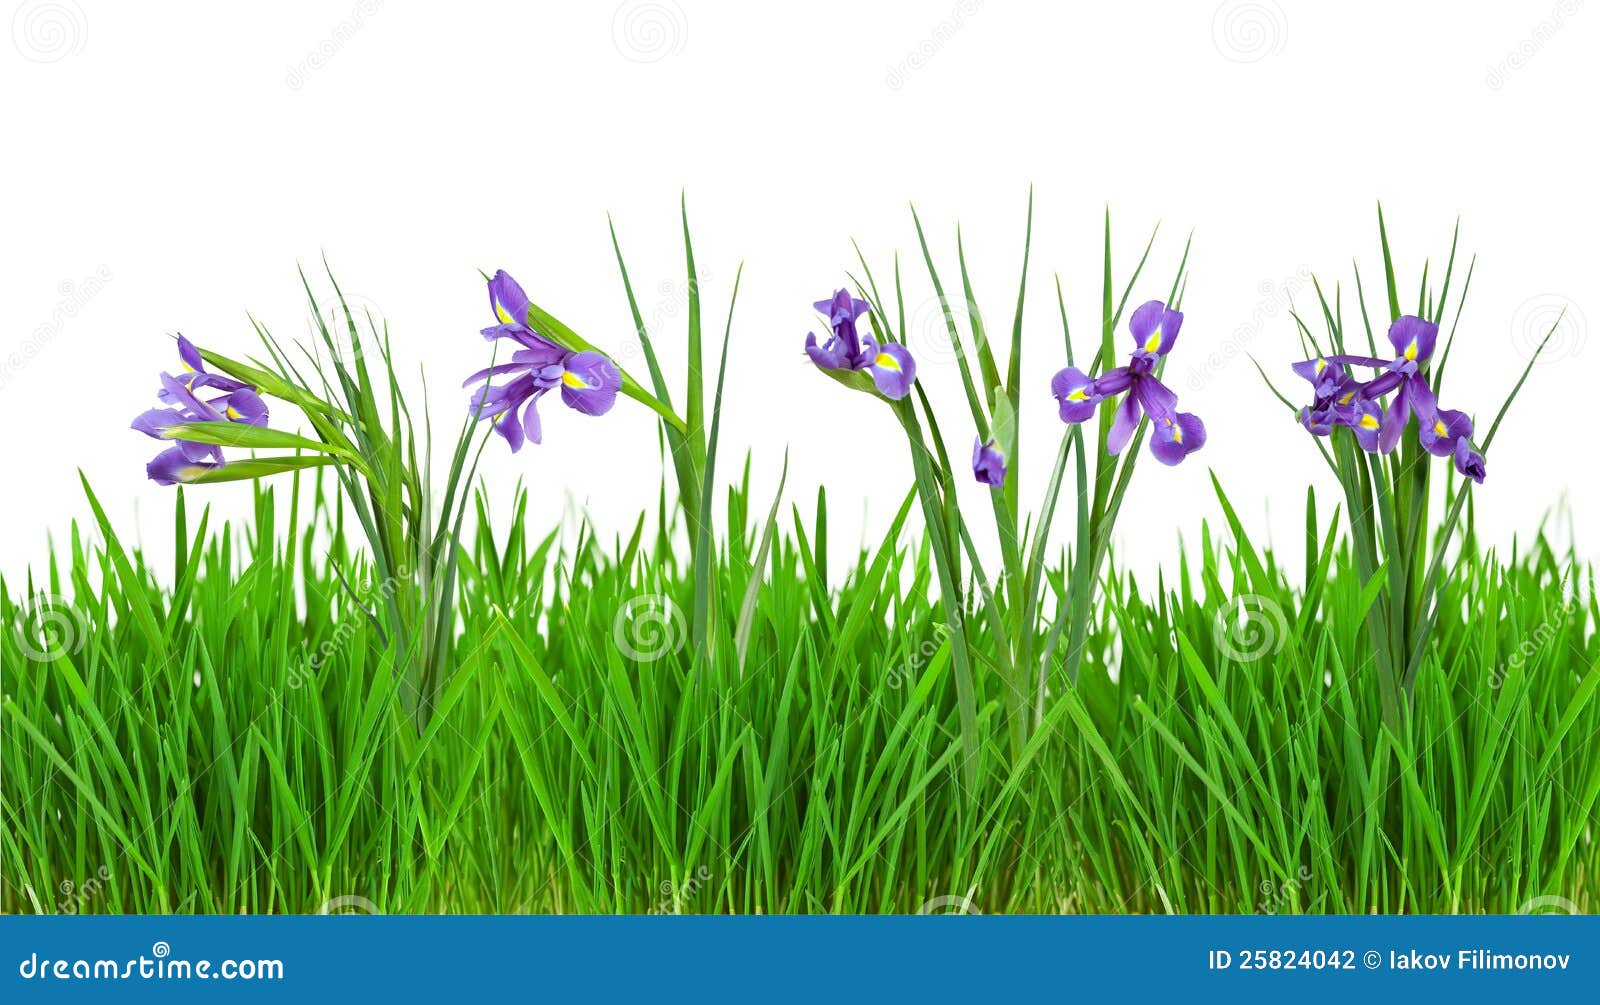 Iris Flowers in Grass Border. Isolated on White Stock Photo ...